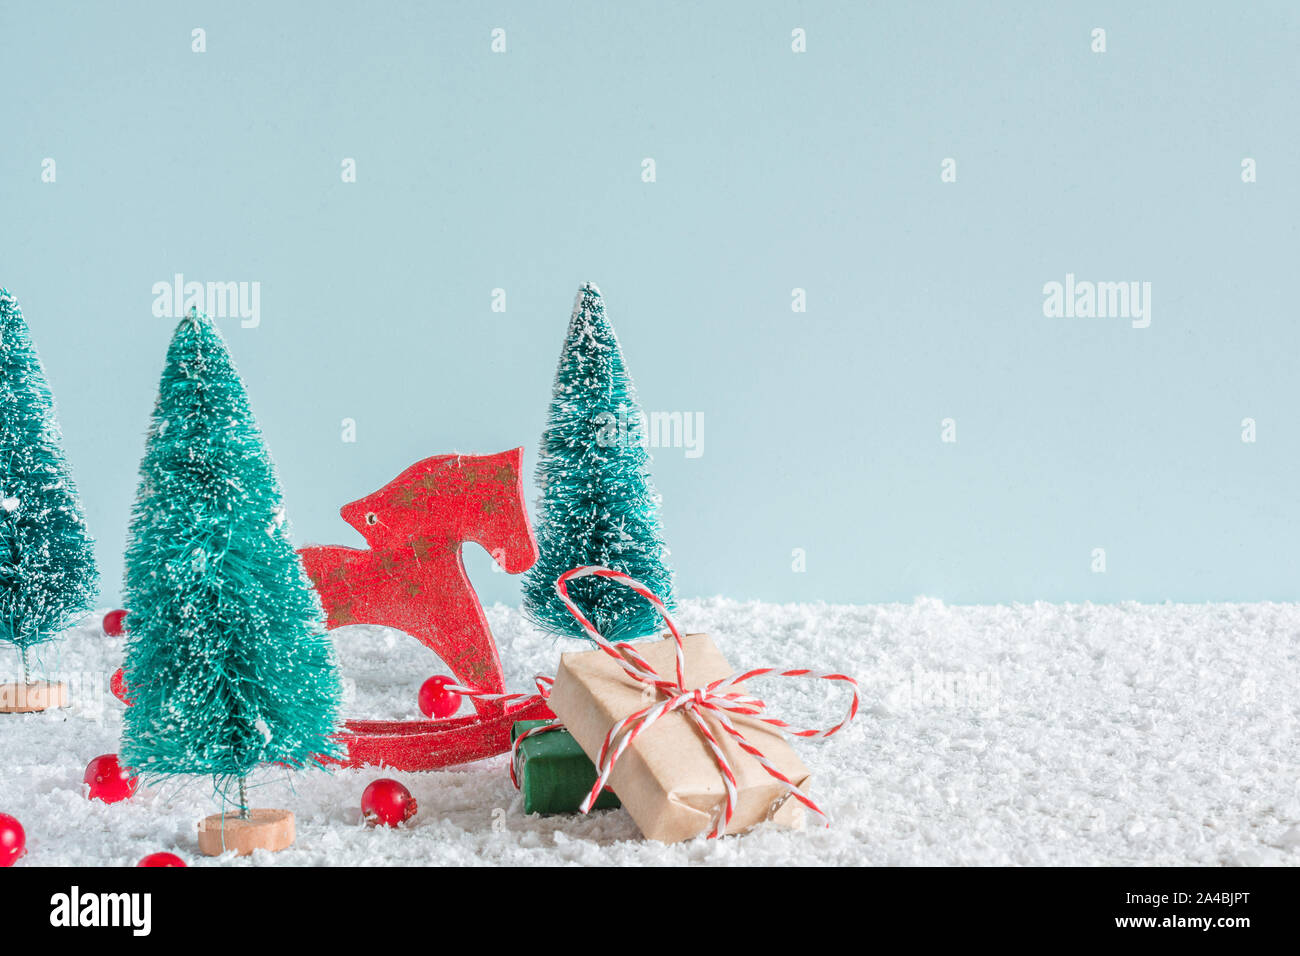 christmas background. fir trees with horse toy, gift boxes and red berries on snow background. creative christmas card with copy space Stock Photo